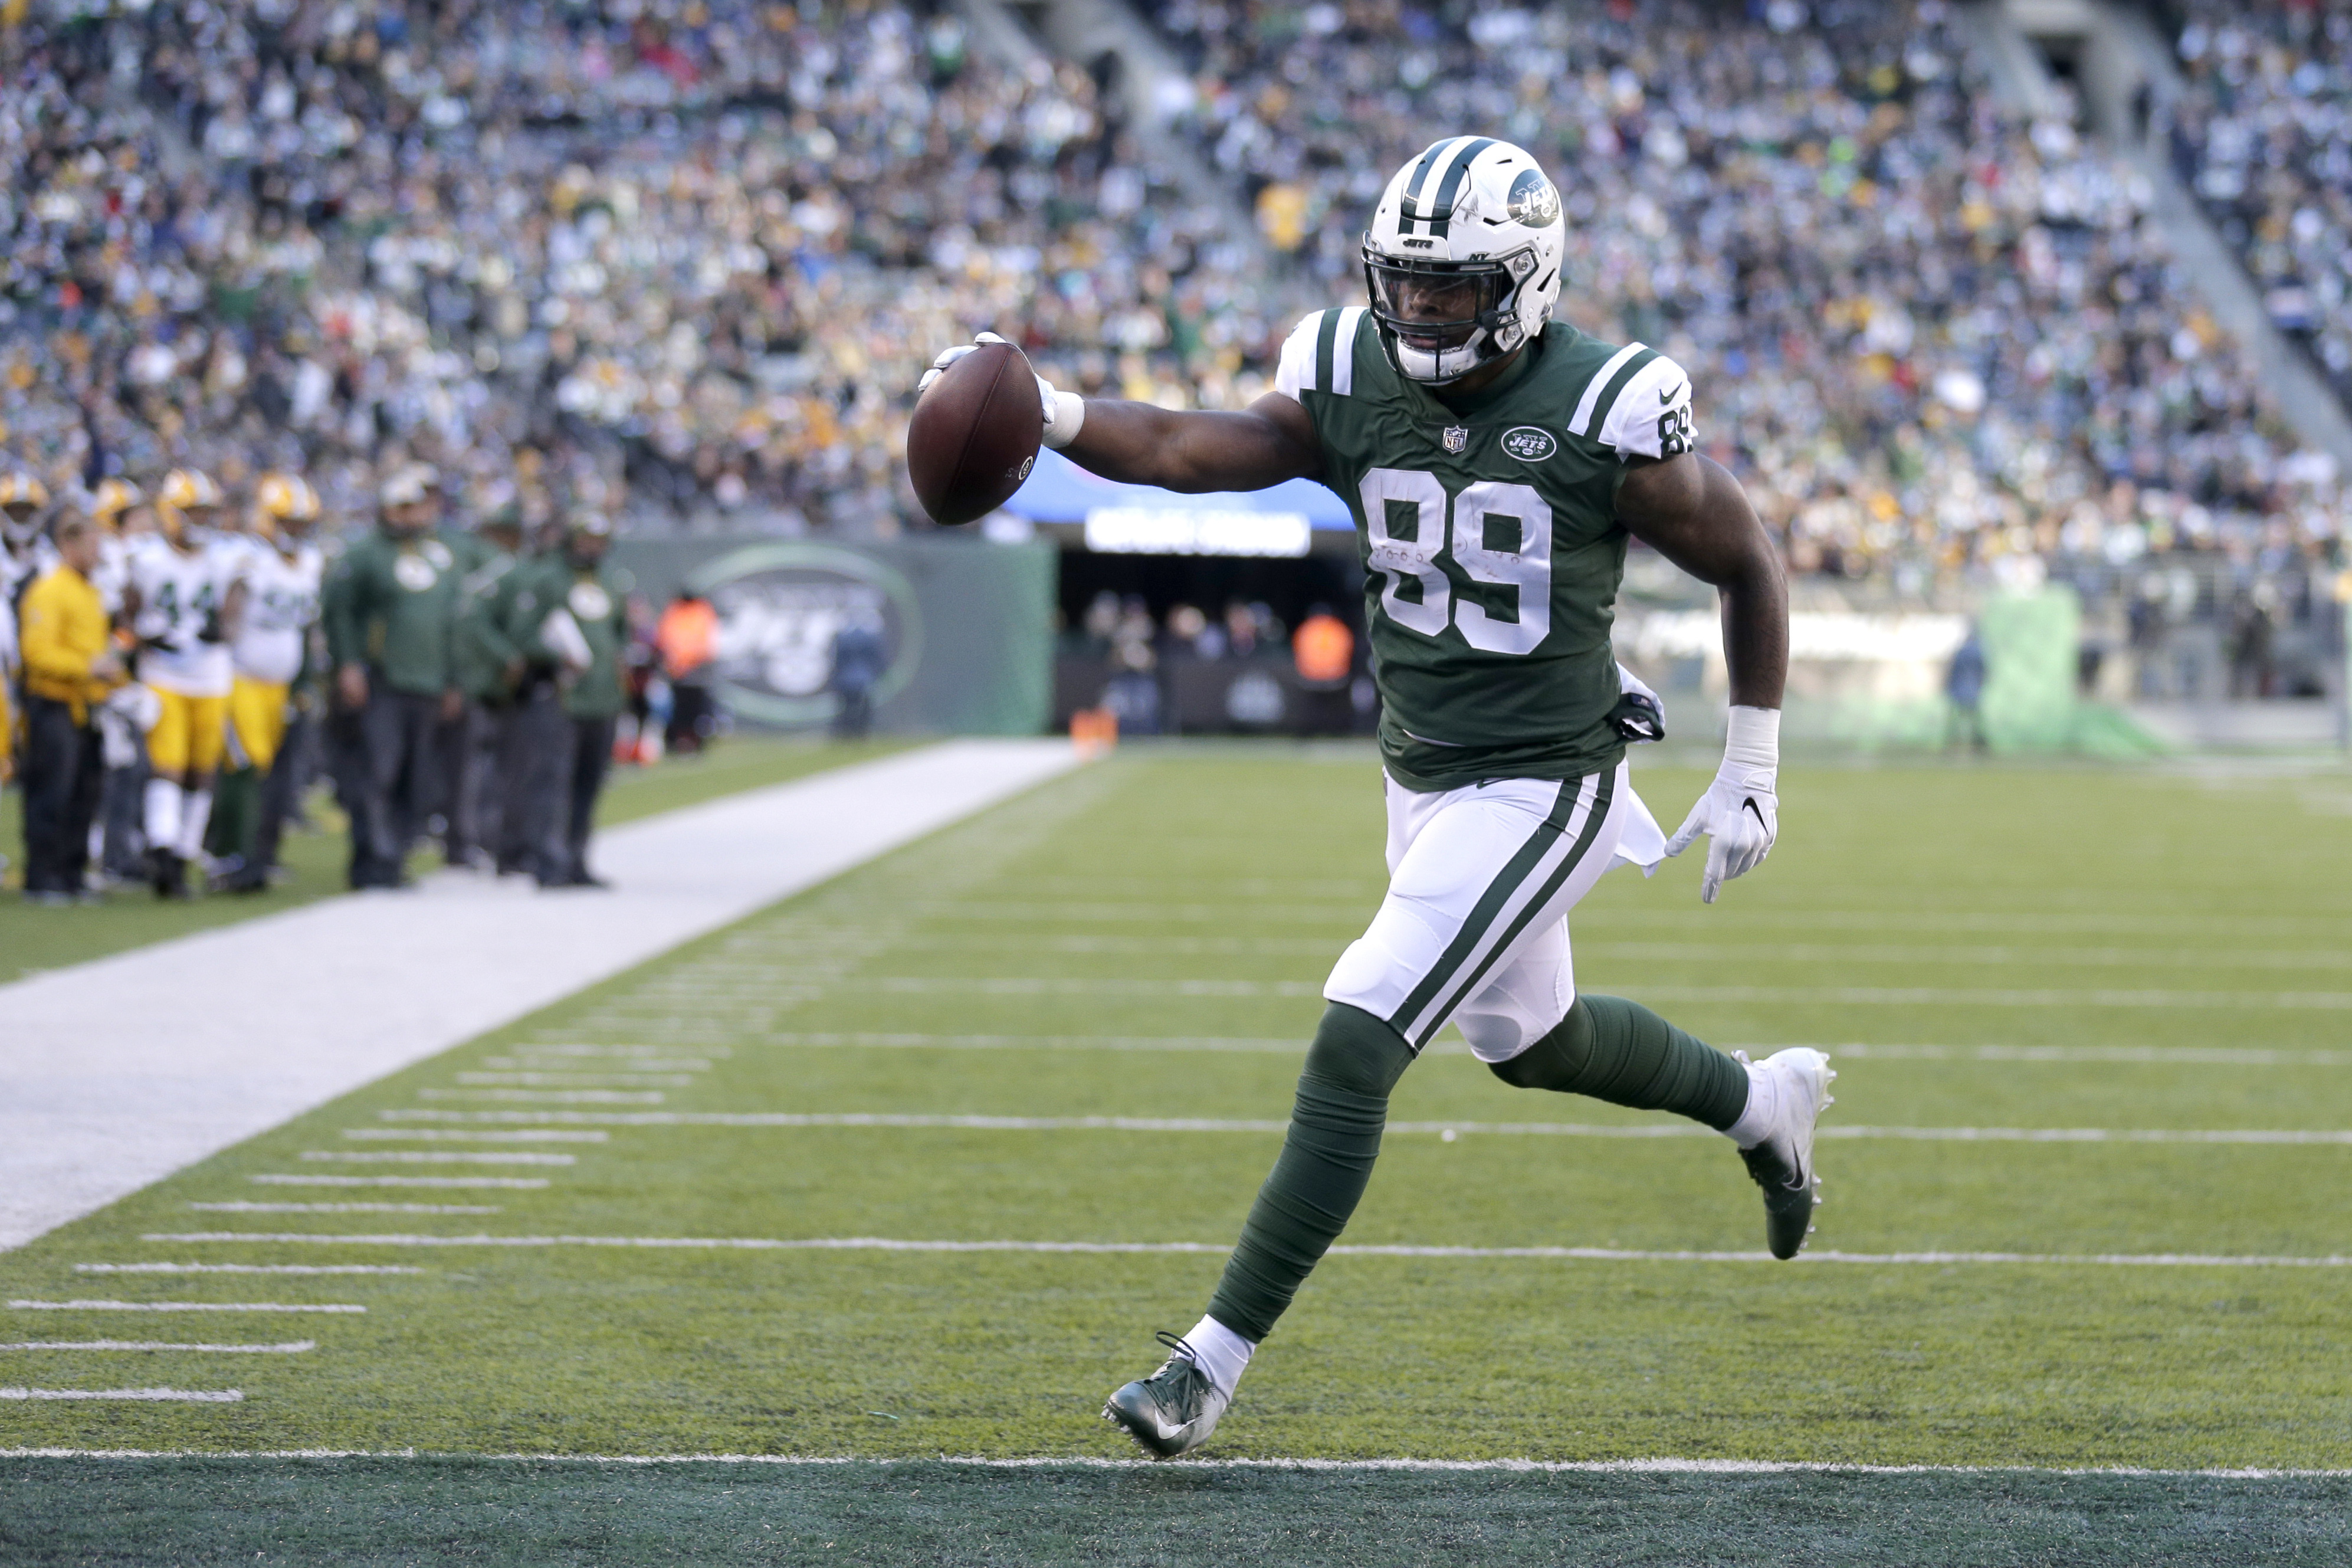 Jets activate TE Herndon, waive LB Luvu